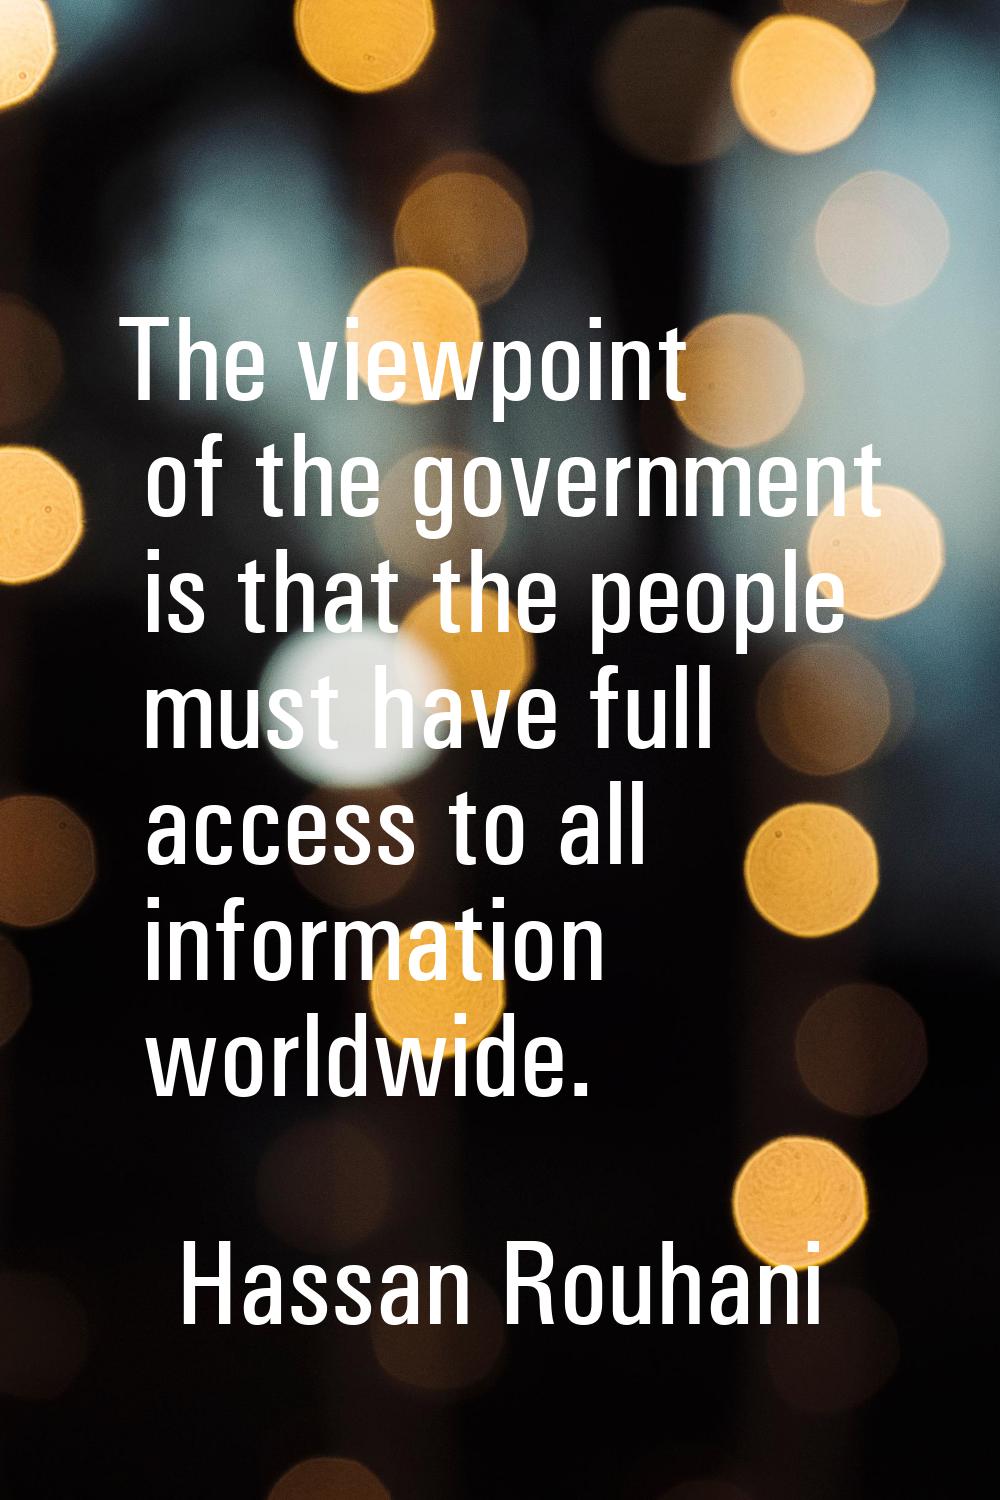 The viewpoint of the government is that the people must have full access to all information worldwi